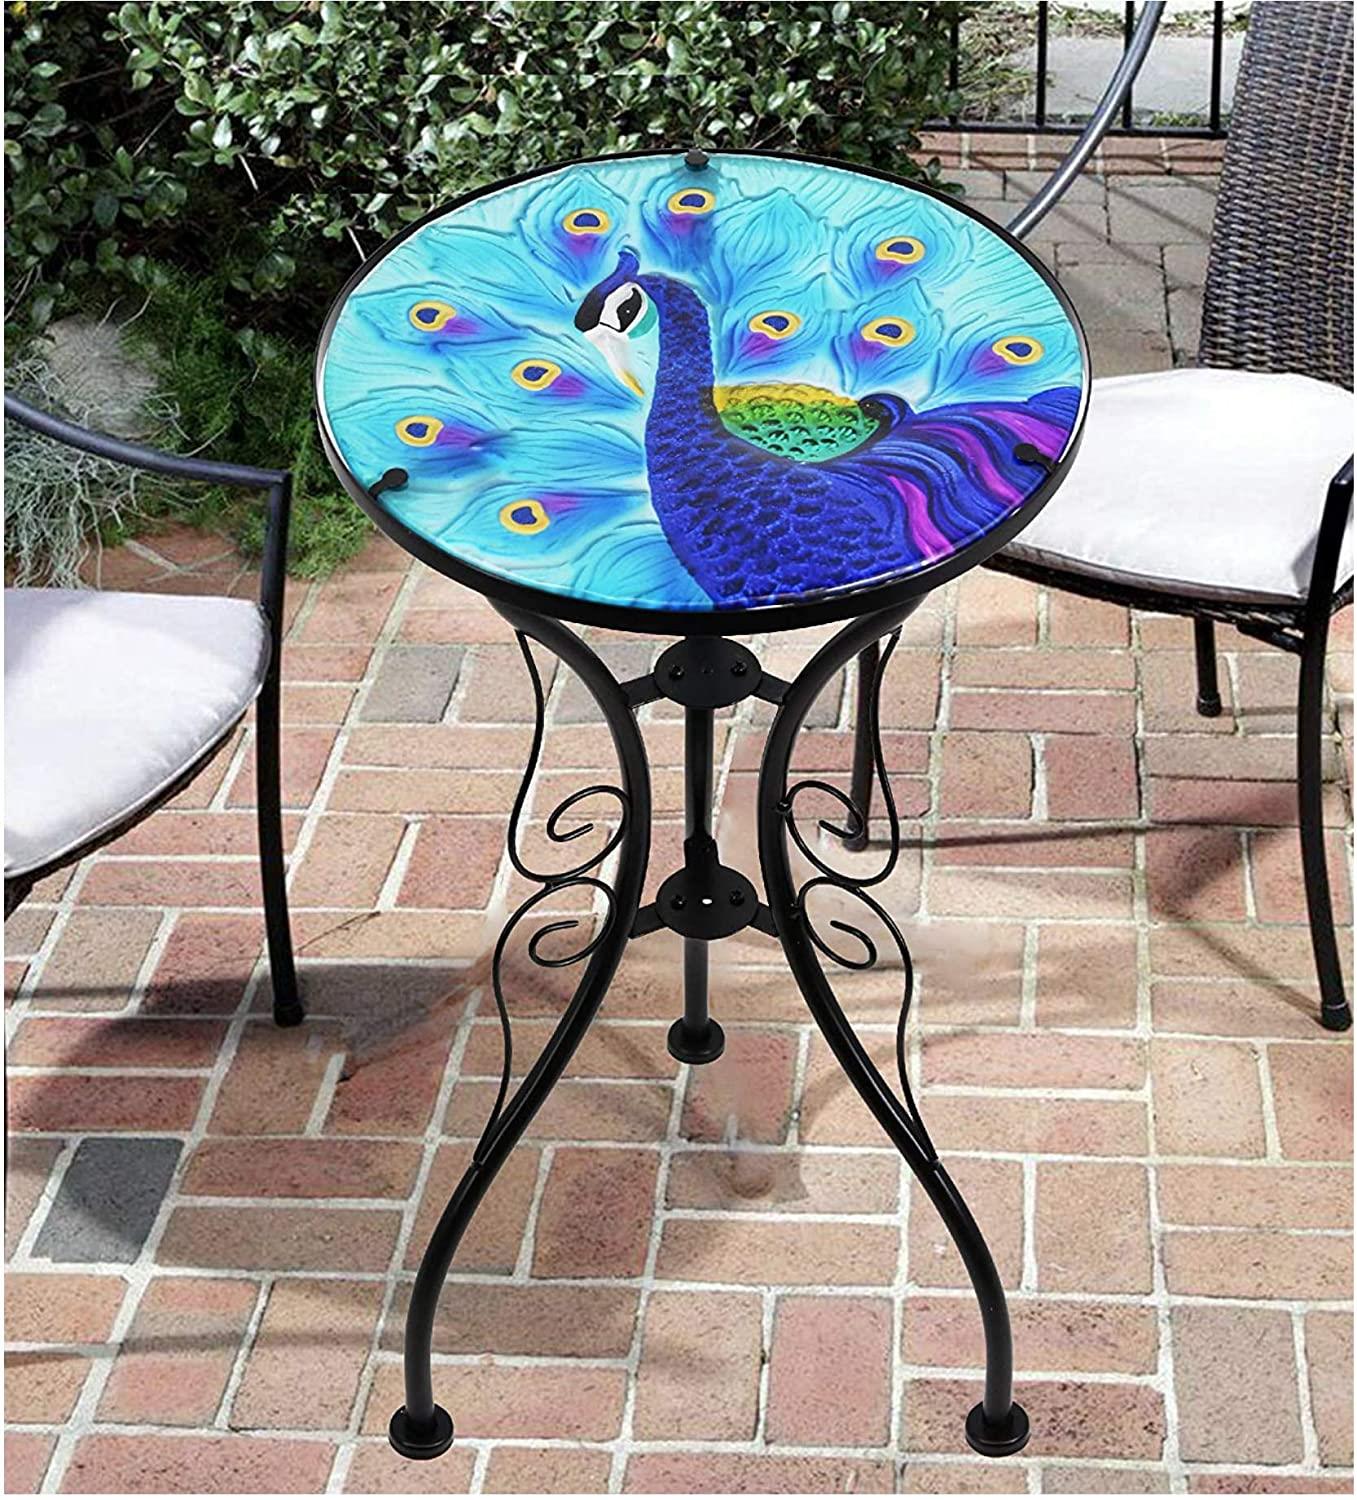 Round Side Mosaic Garden Table With Blue Peacock Design by Geezy - UKBuyZone